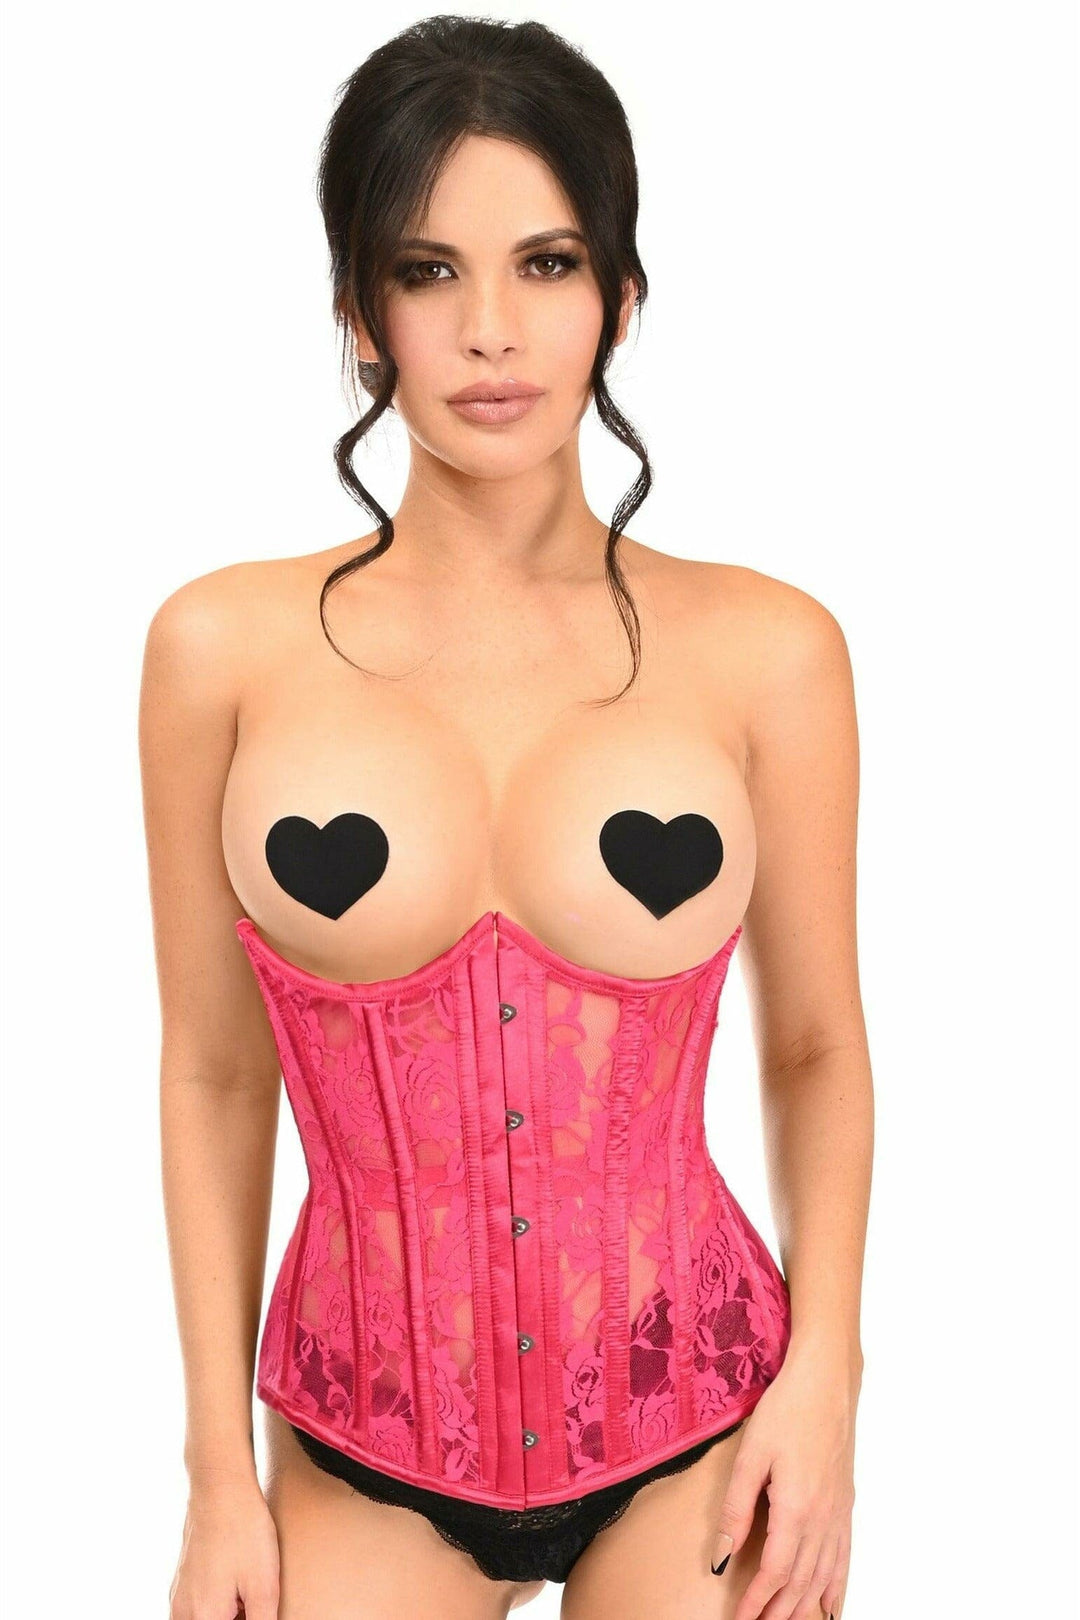 Lavish Fuchsia Sheer Lace Underwire Open Cup Underbust Corset-Underbust Corsets-Daisy Corsets-Fuchsia-S-SEXYSHOES.COM